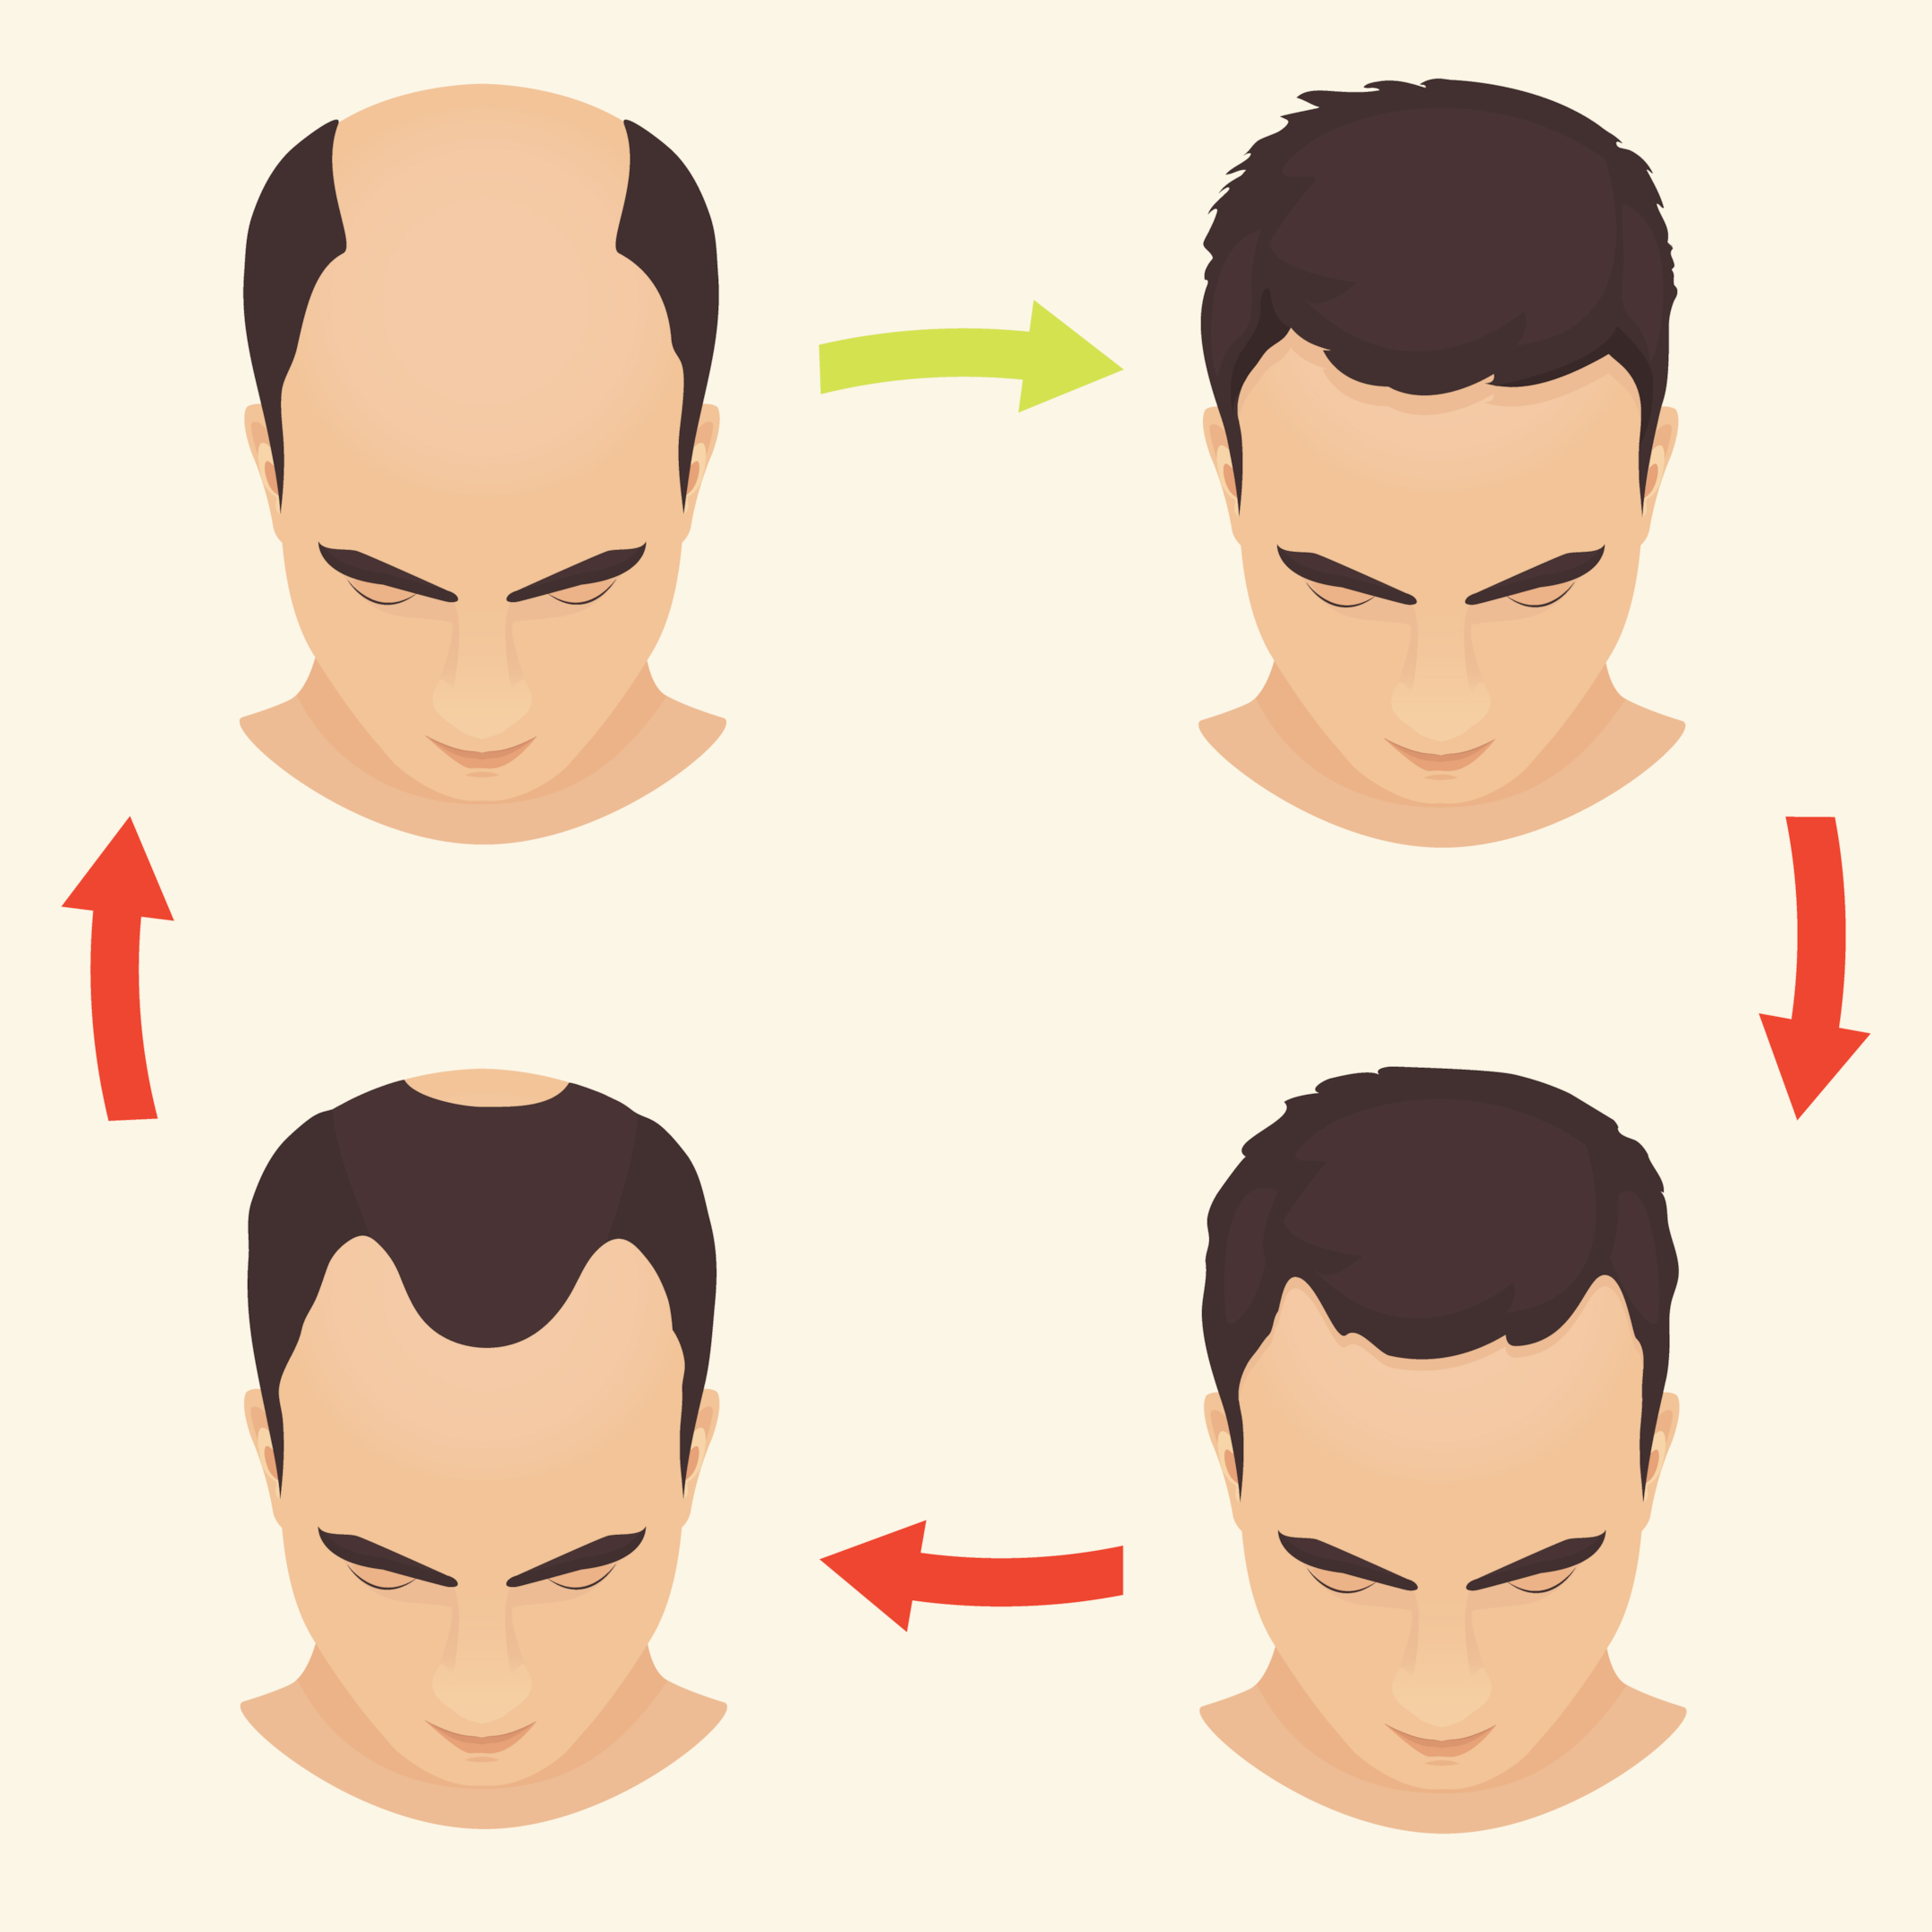 An illustrated diagram showing the progressive stages of male pattern baldness: full head of hair; balding at the temples; a receding hairline; thinning at the crown and then eventually complete hair loss along the top of the scalp. 